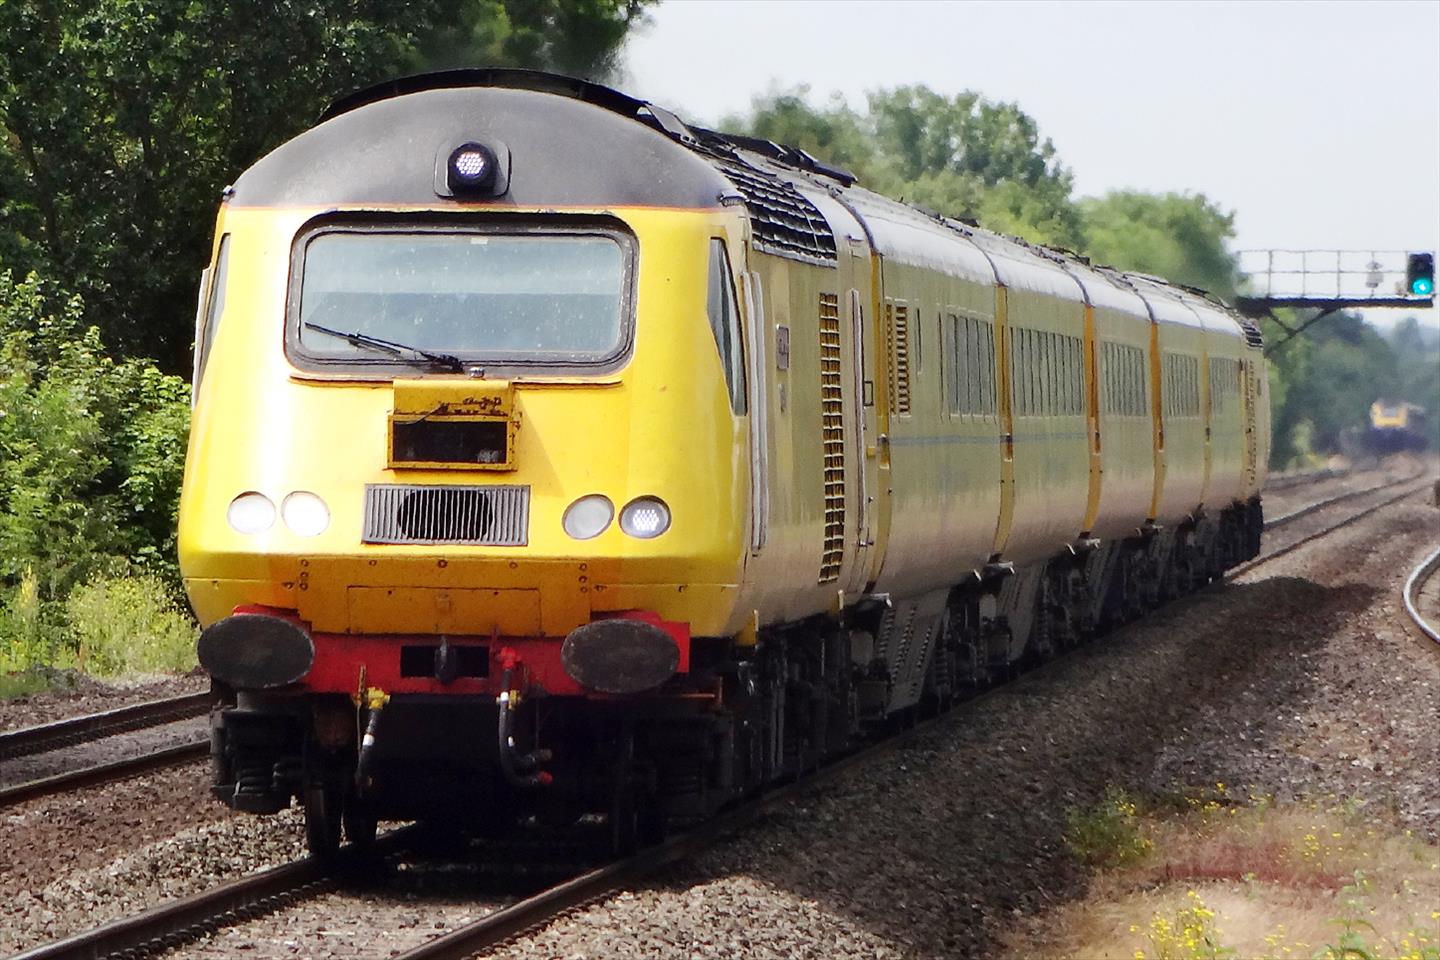 43014 heads an NMT run from Plymouth to Paddington through Taplow on 20th June 2014 Photo: Jim Tucker